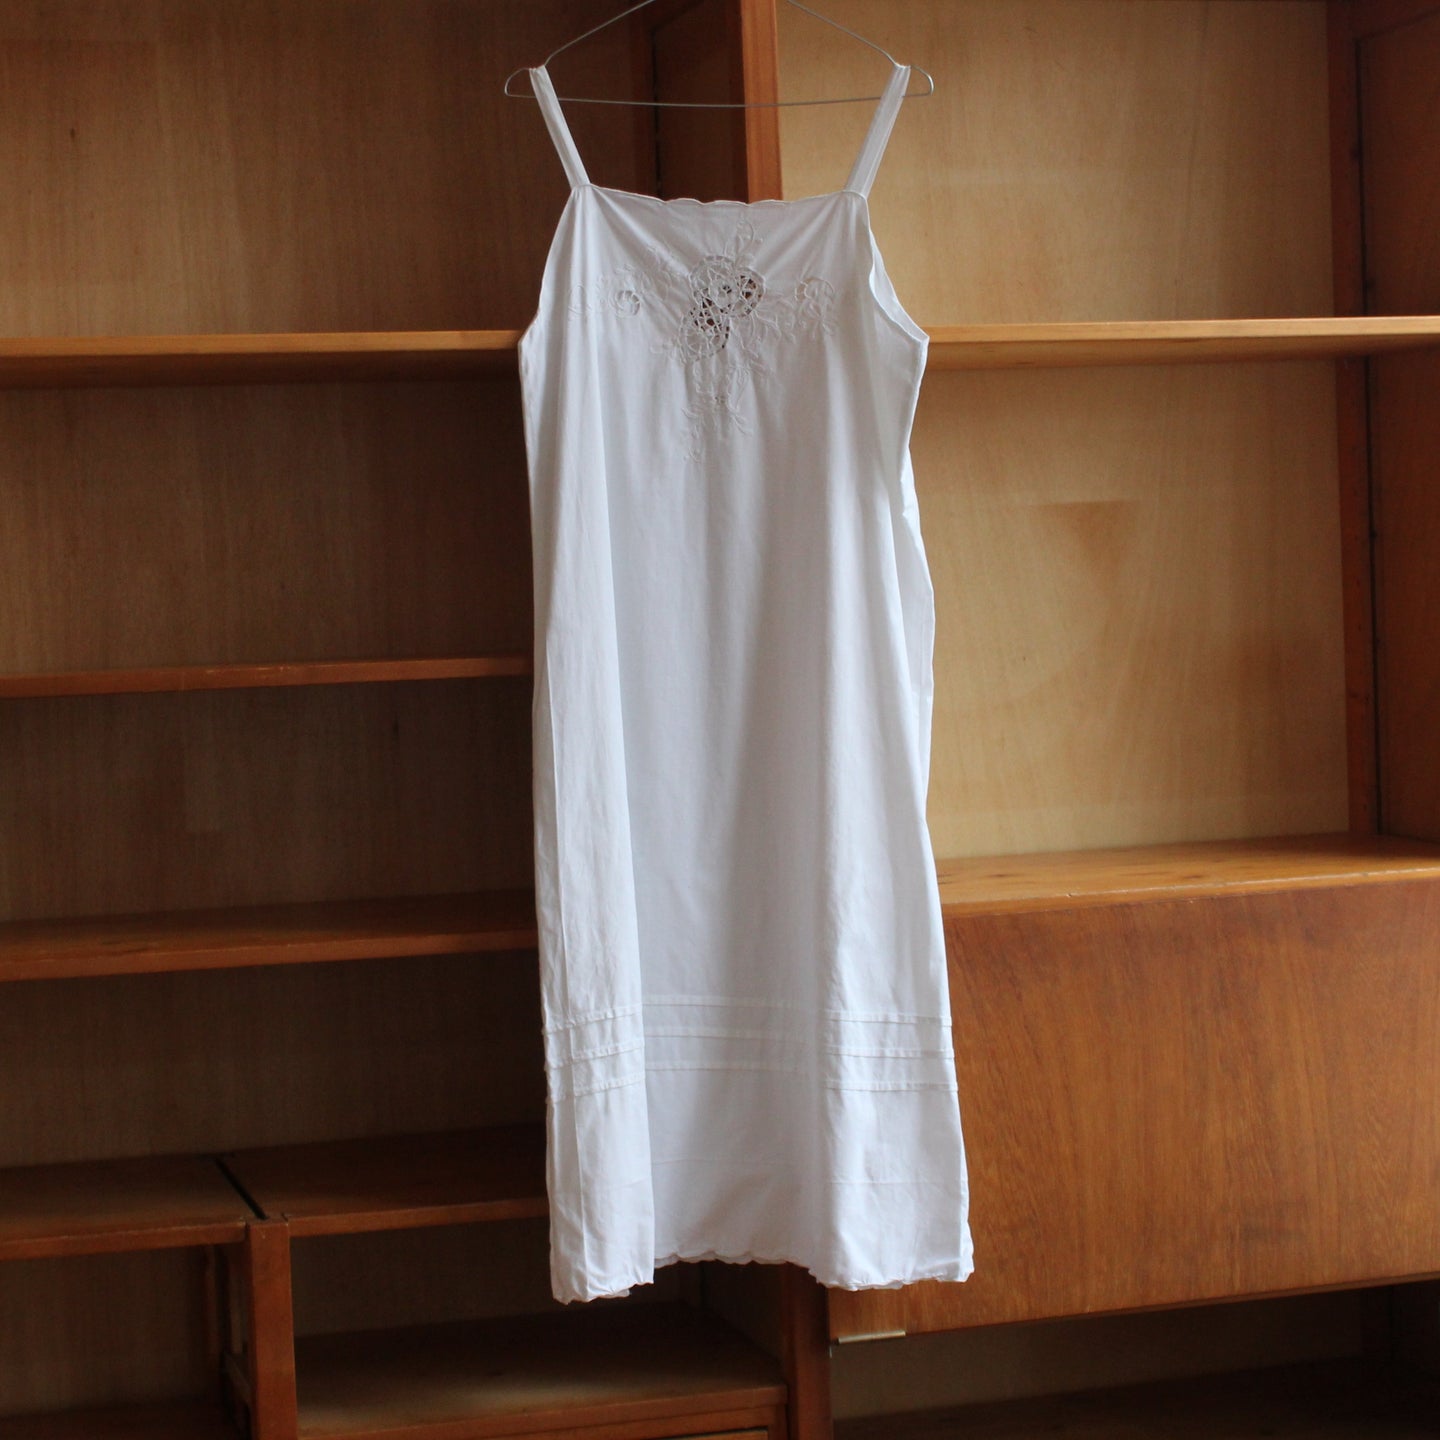 Vintage white cotton nightdress with embroidered details, size S/M